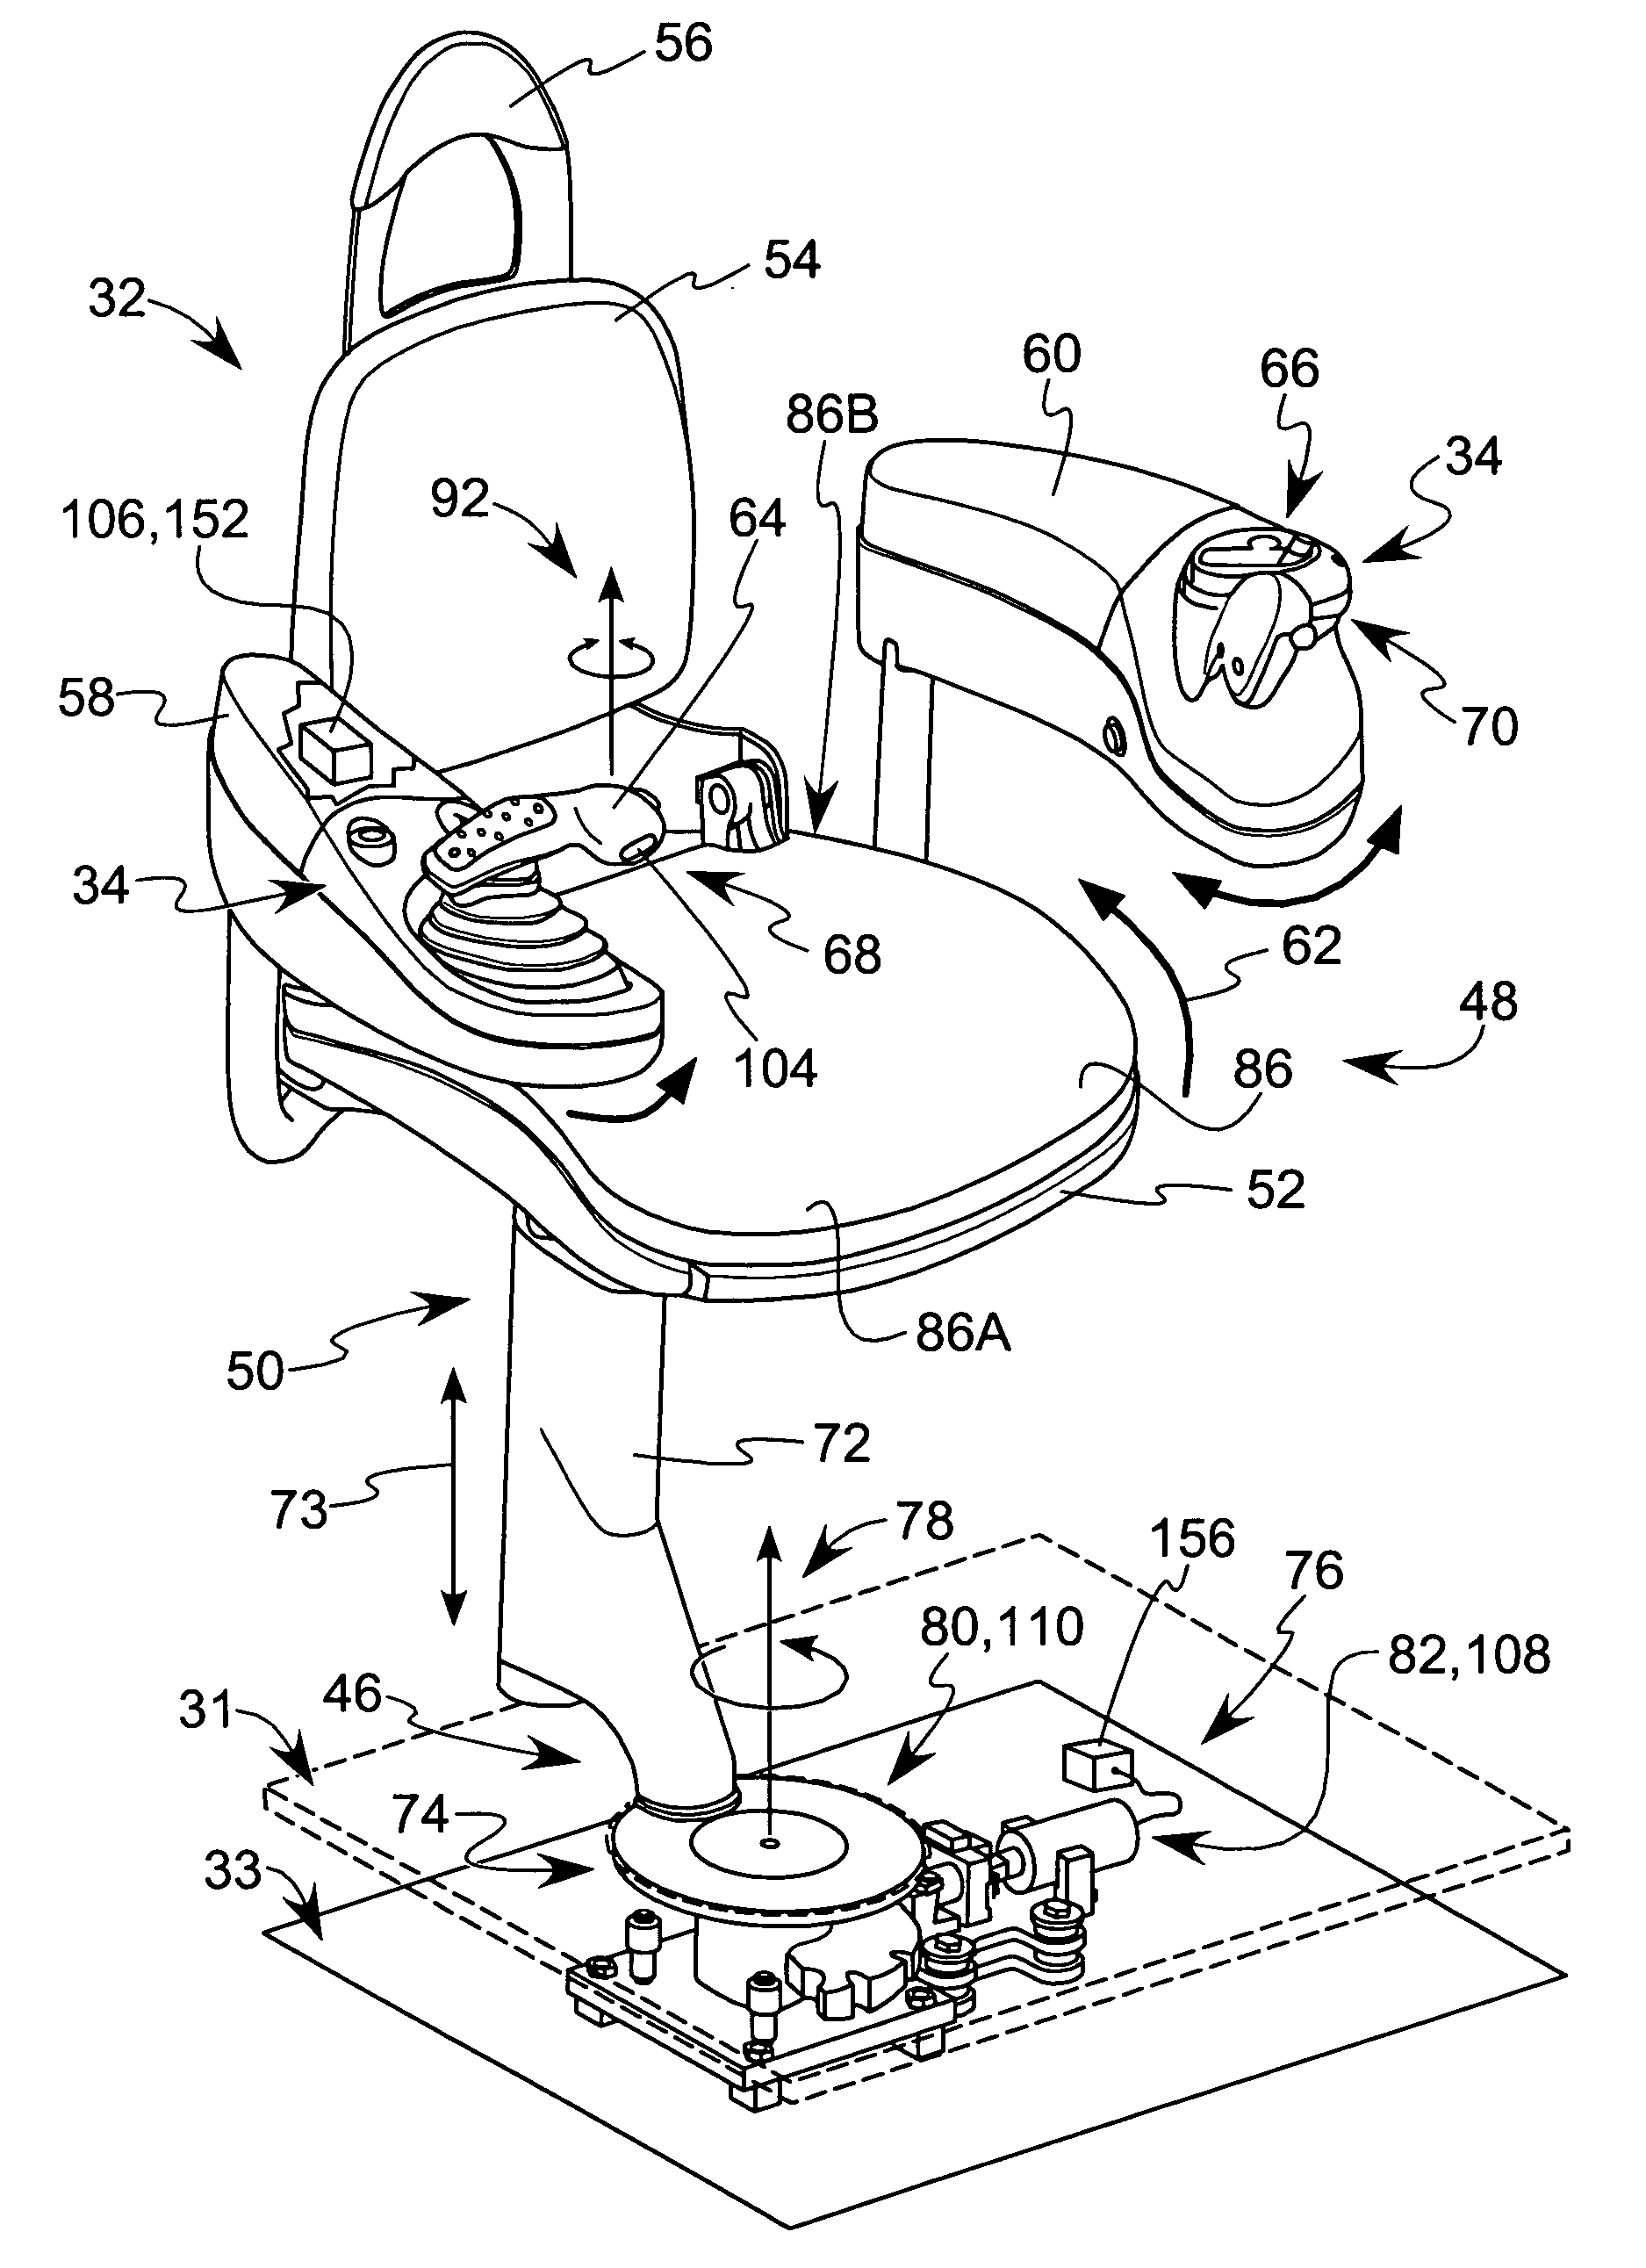 Rotating and/or swiveling seat